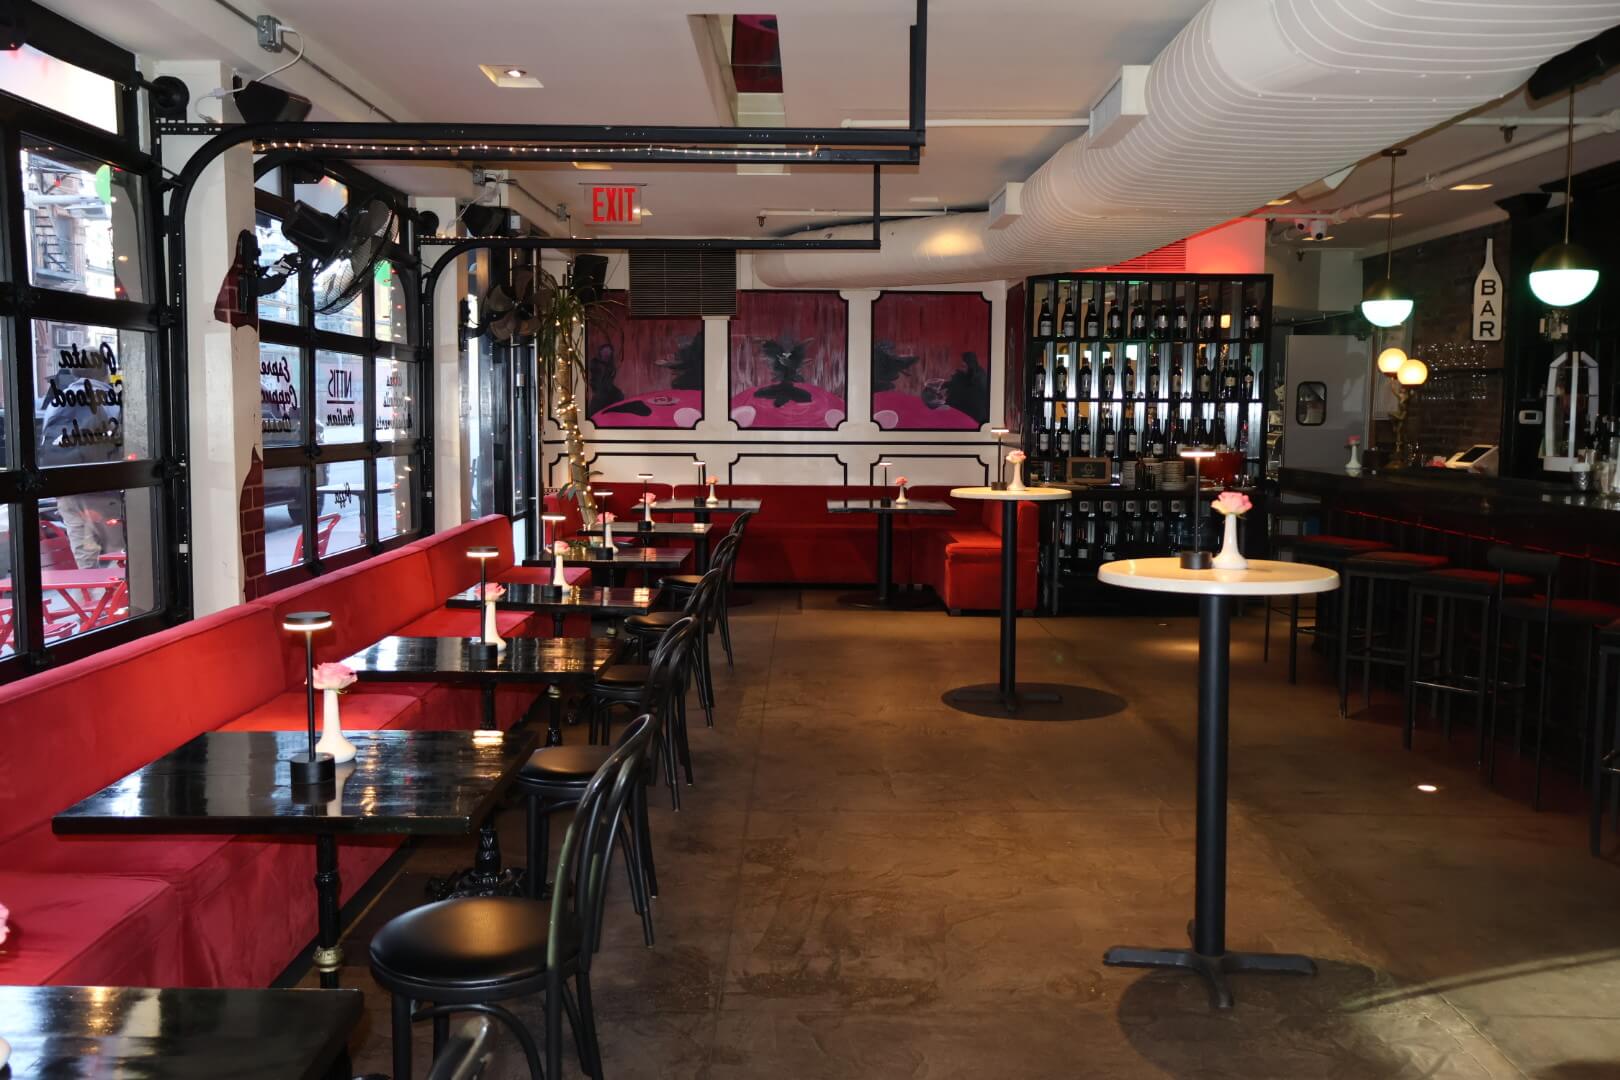 Black tables set against red booth with high tables in center of the room perfect for people to visit while mingling at an event